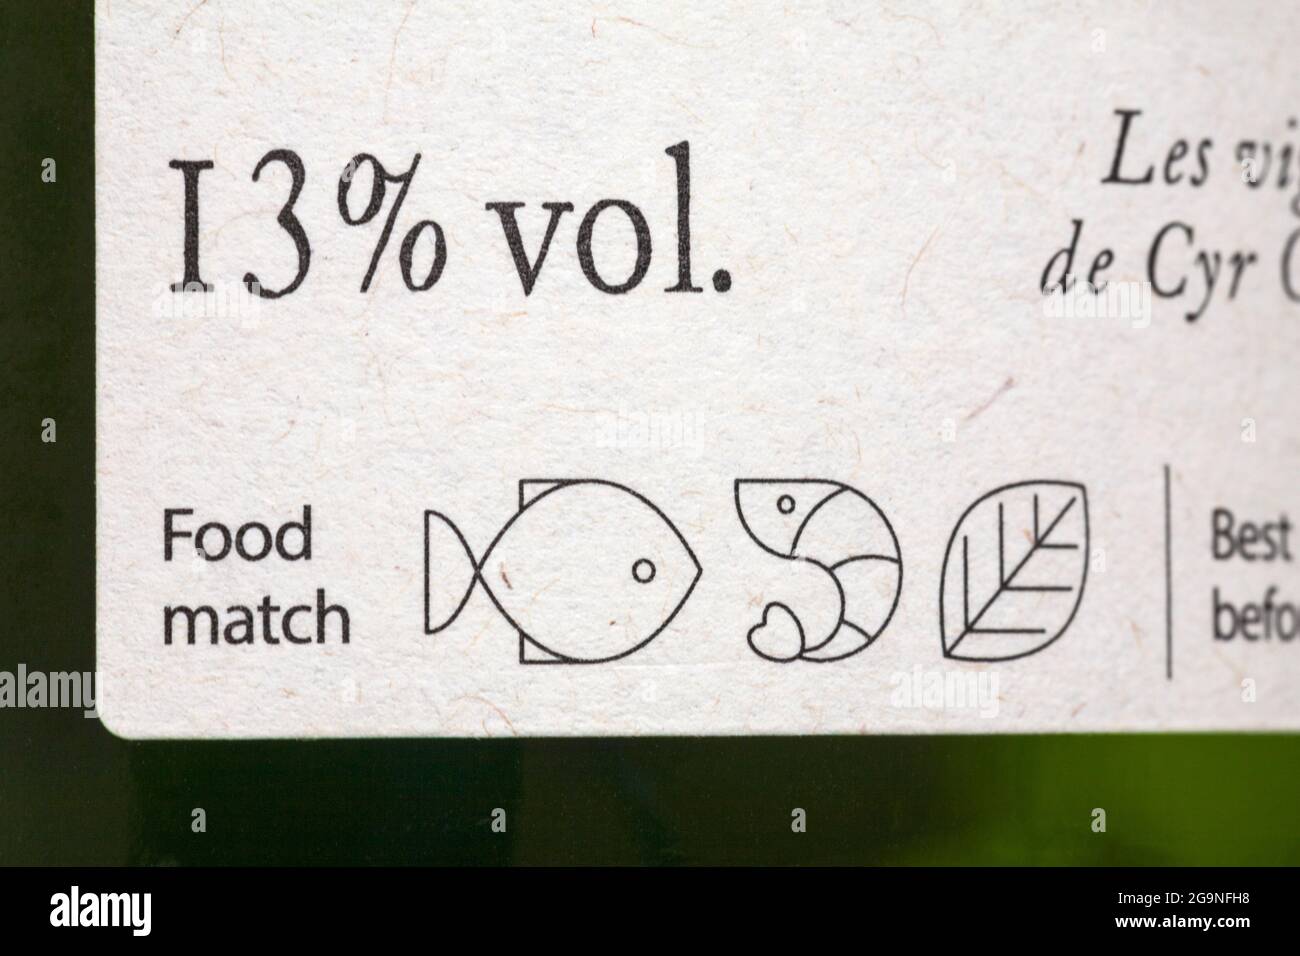 Food match symbols and 13% vol - detail on bottle of wine to match wine with food - alcohol by volume, alcohol content, strength Stock Photo